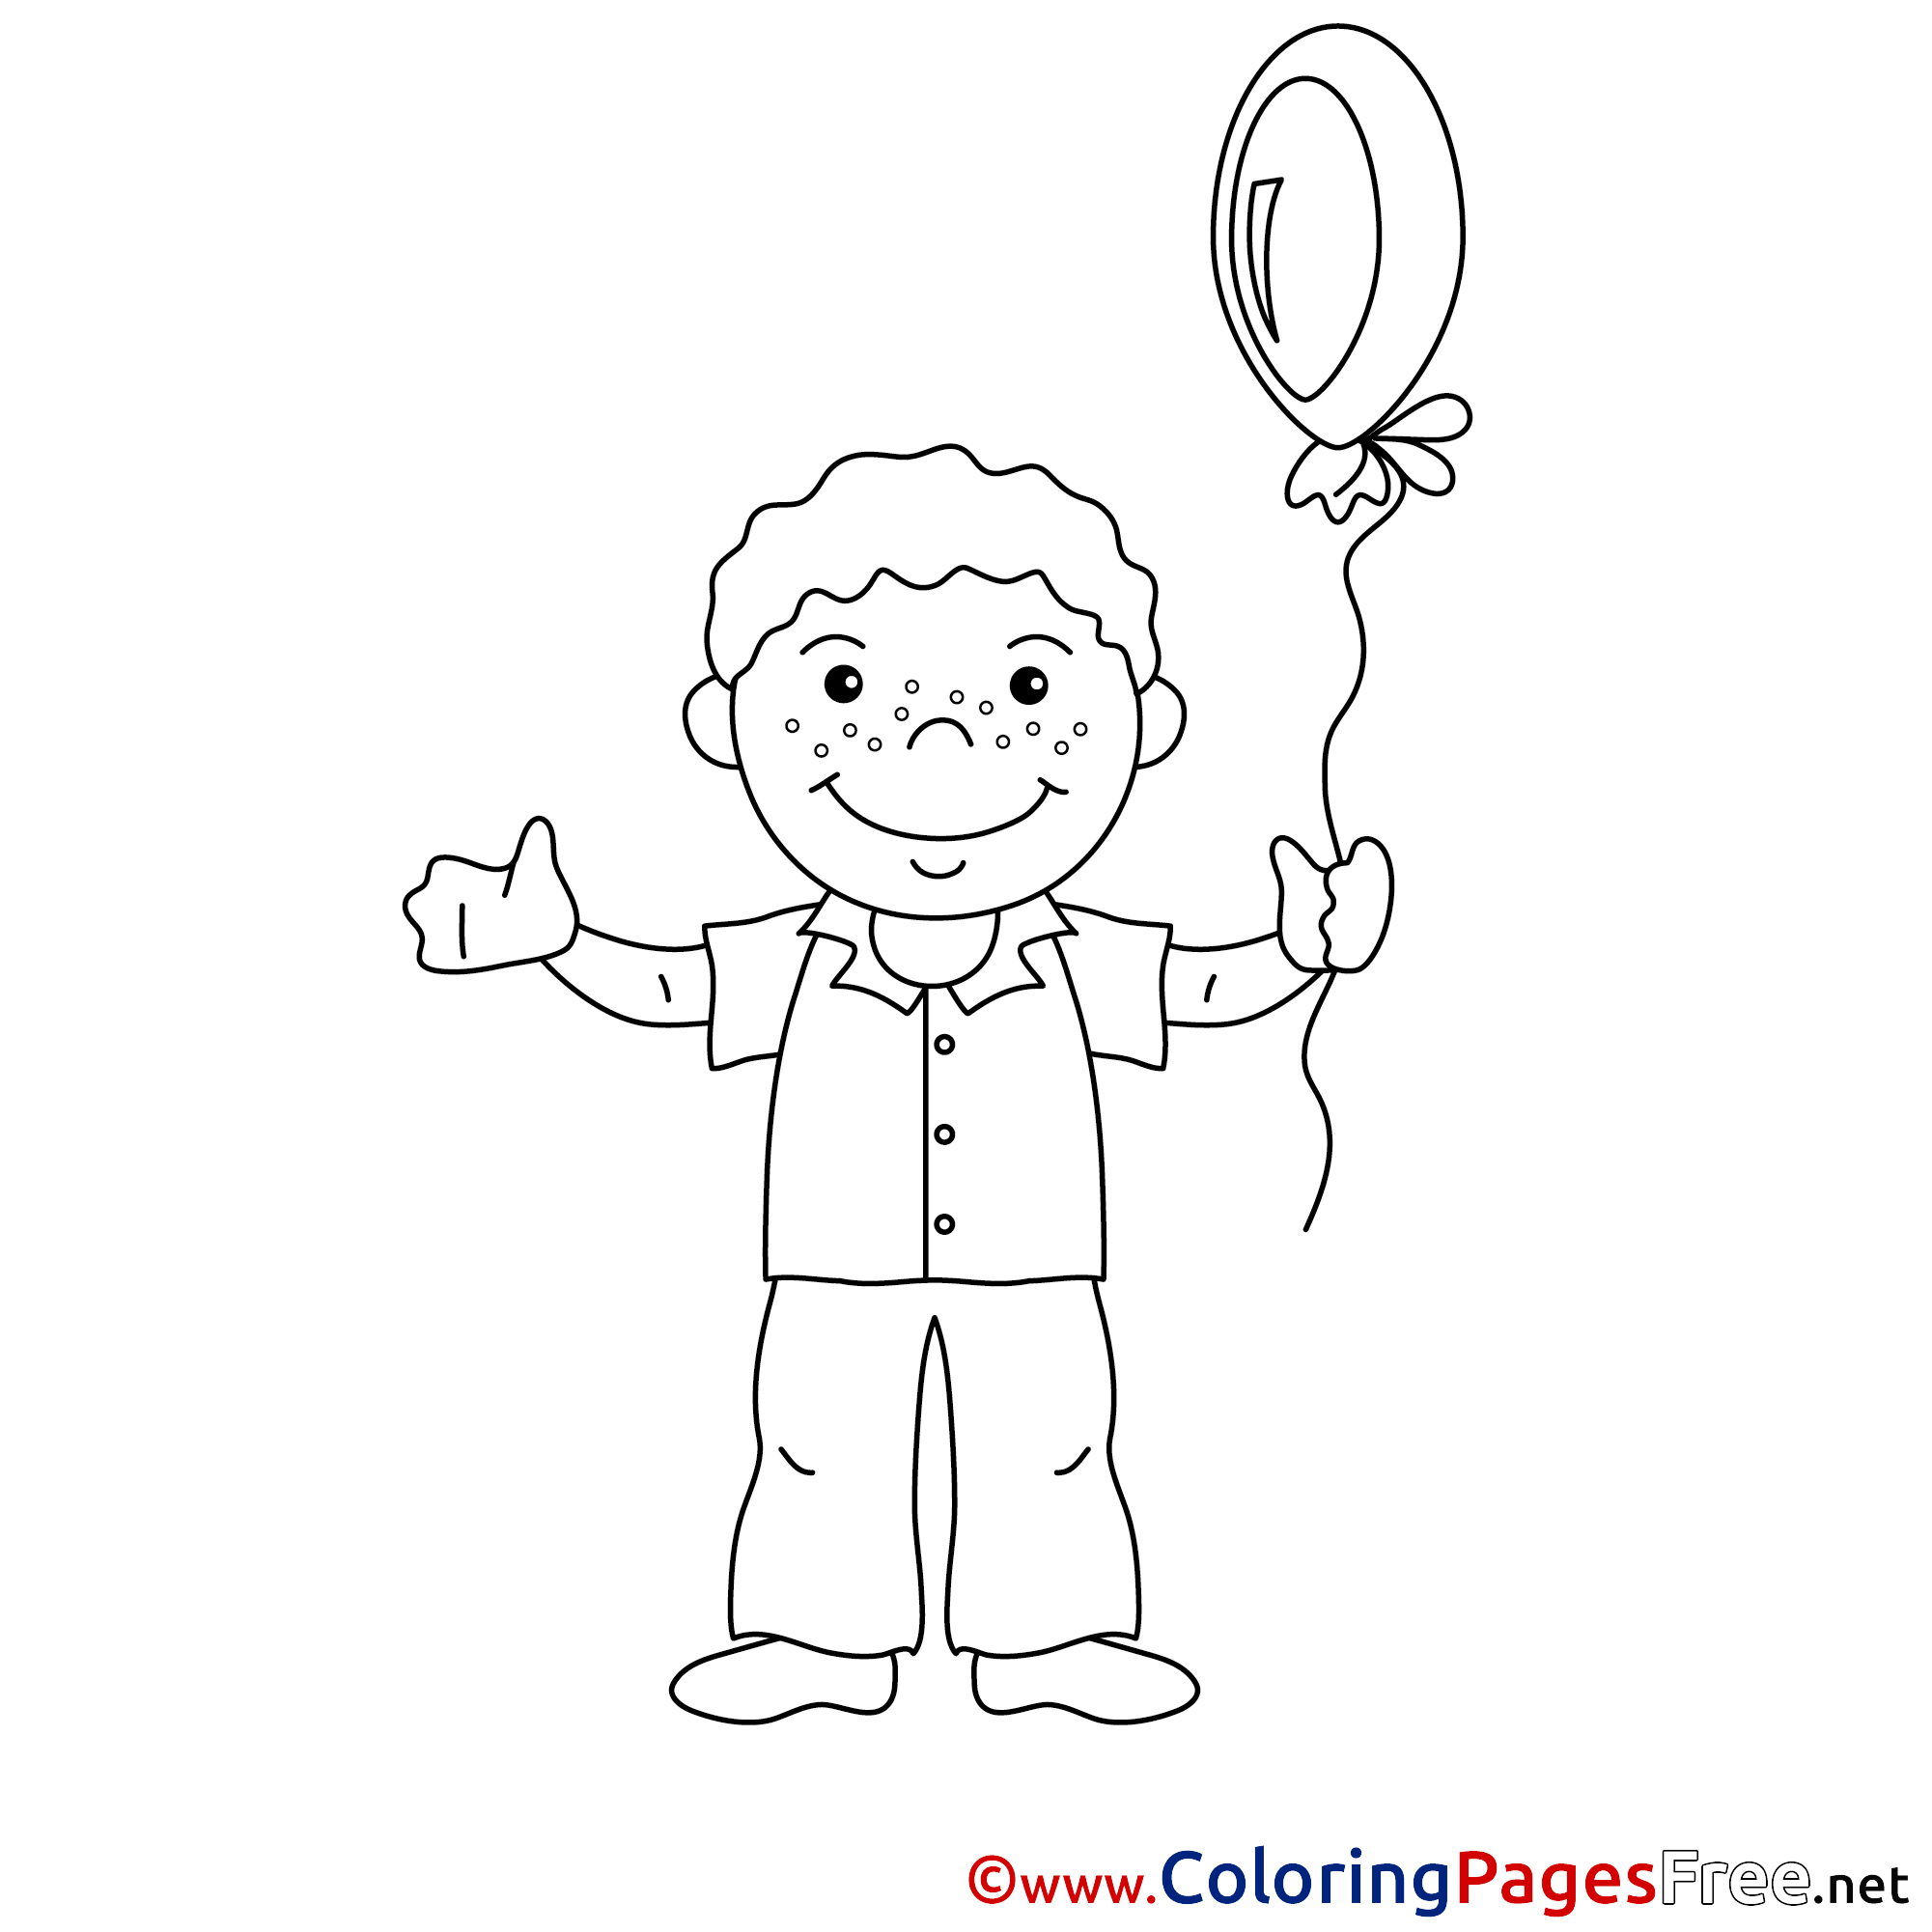 Balloon Boy free Colouring Page download